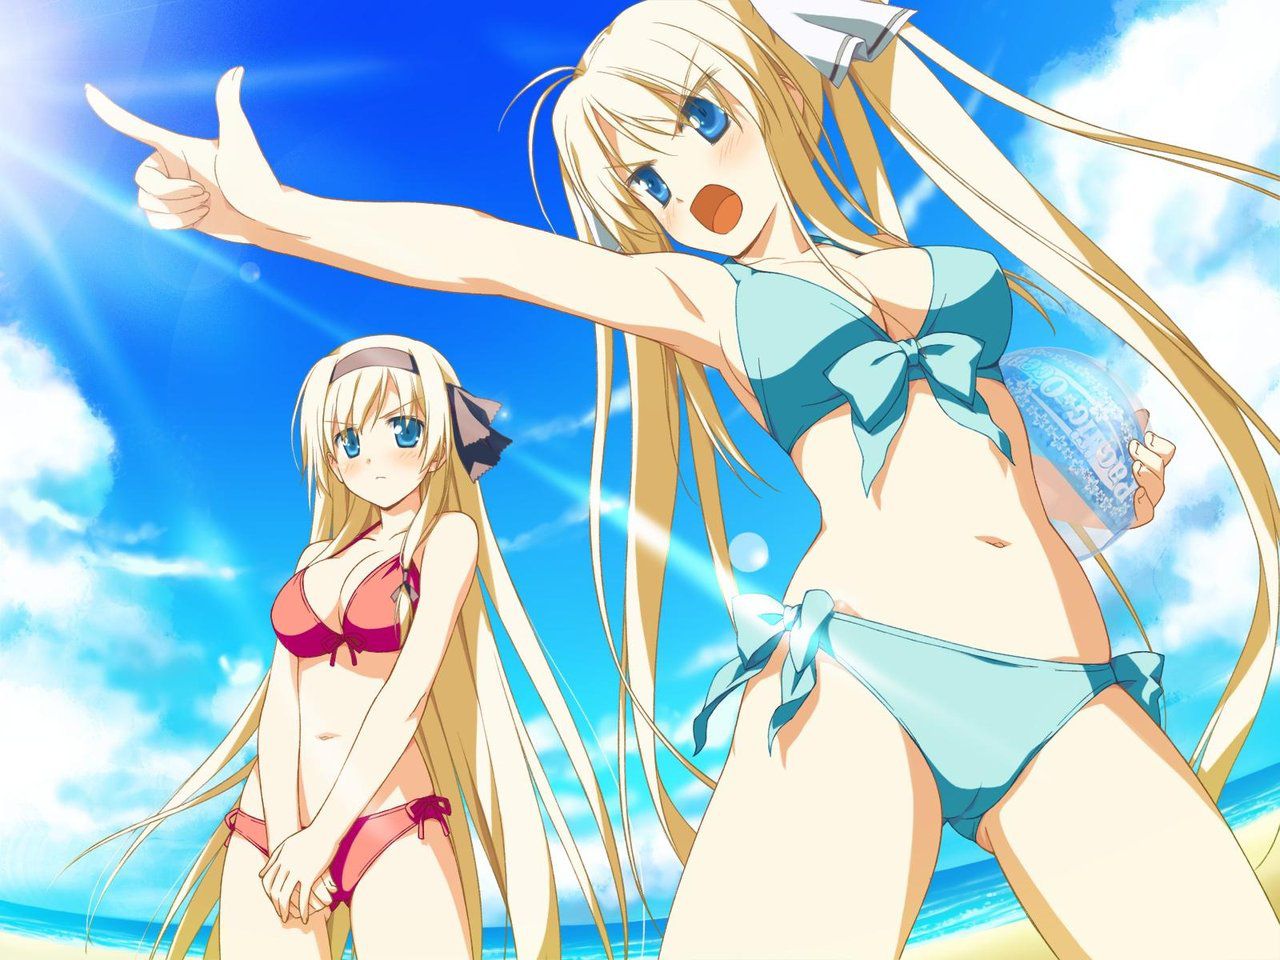 [Swimsuit] can't wait until summer vacation! I want to see a swimsuit and a bikini girl! Part 5 [2-d] 14